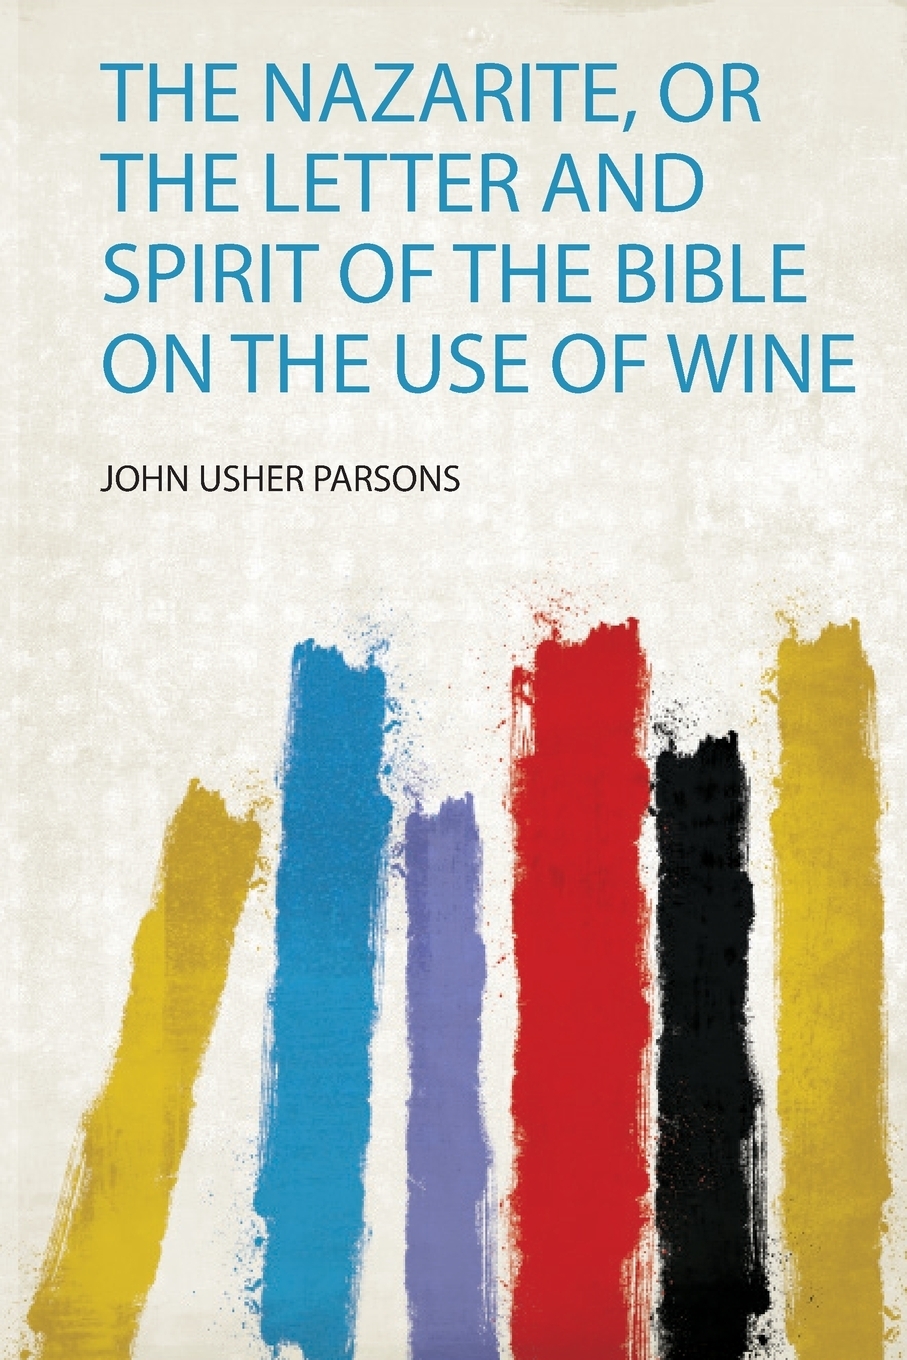 The Nazarite, or the Letter and Spirit of the Bible on the Use of Wine